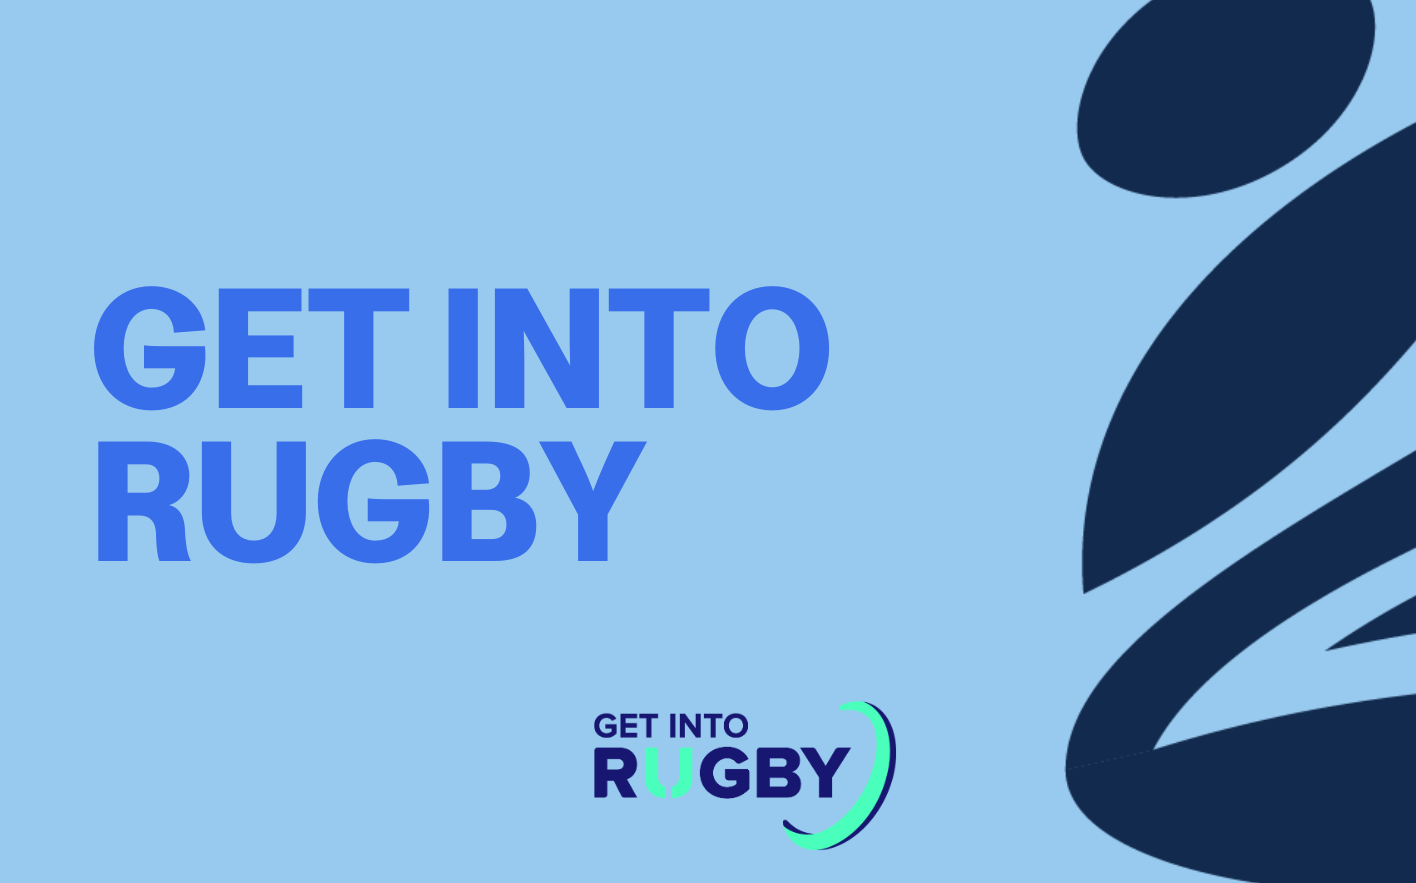 Get into rugby 